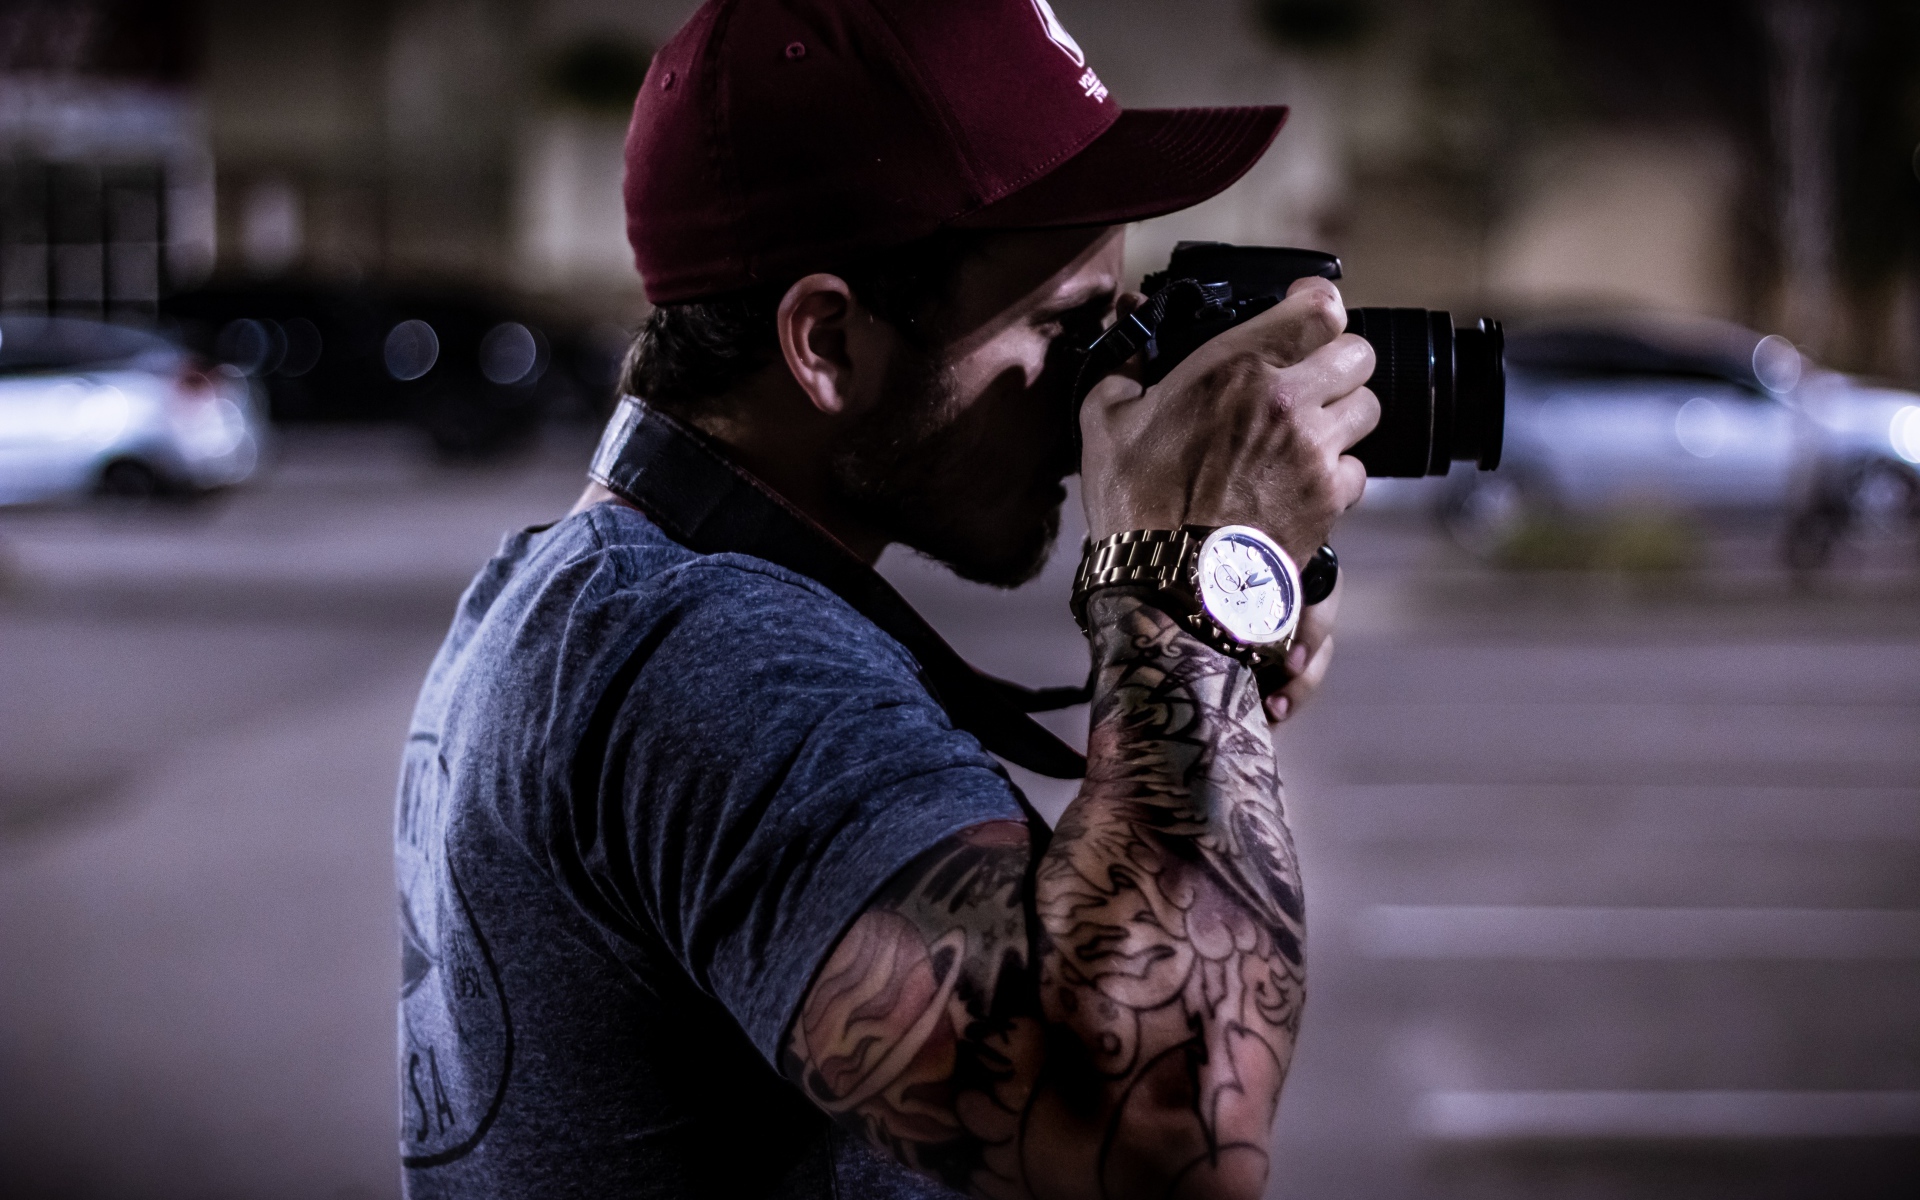 A man with a tattoo on his hand makes a photo